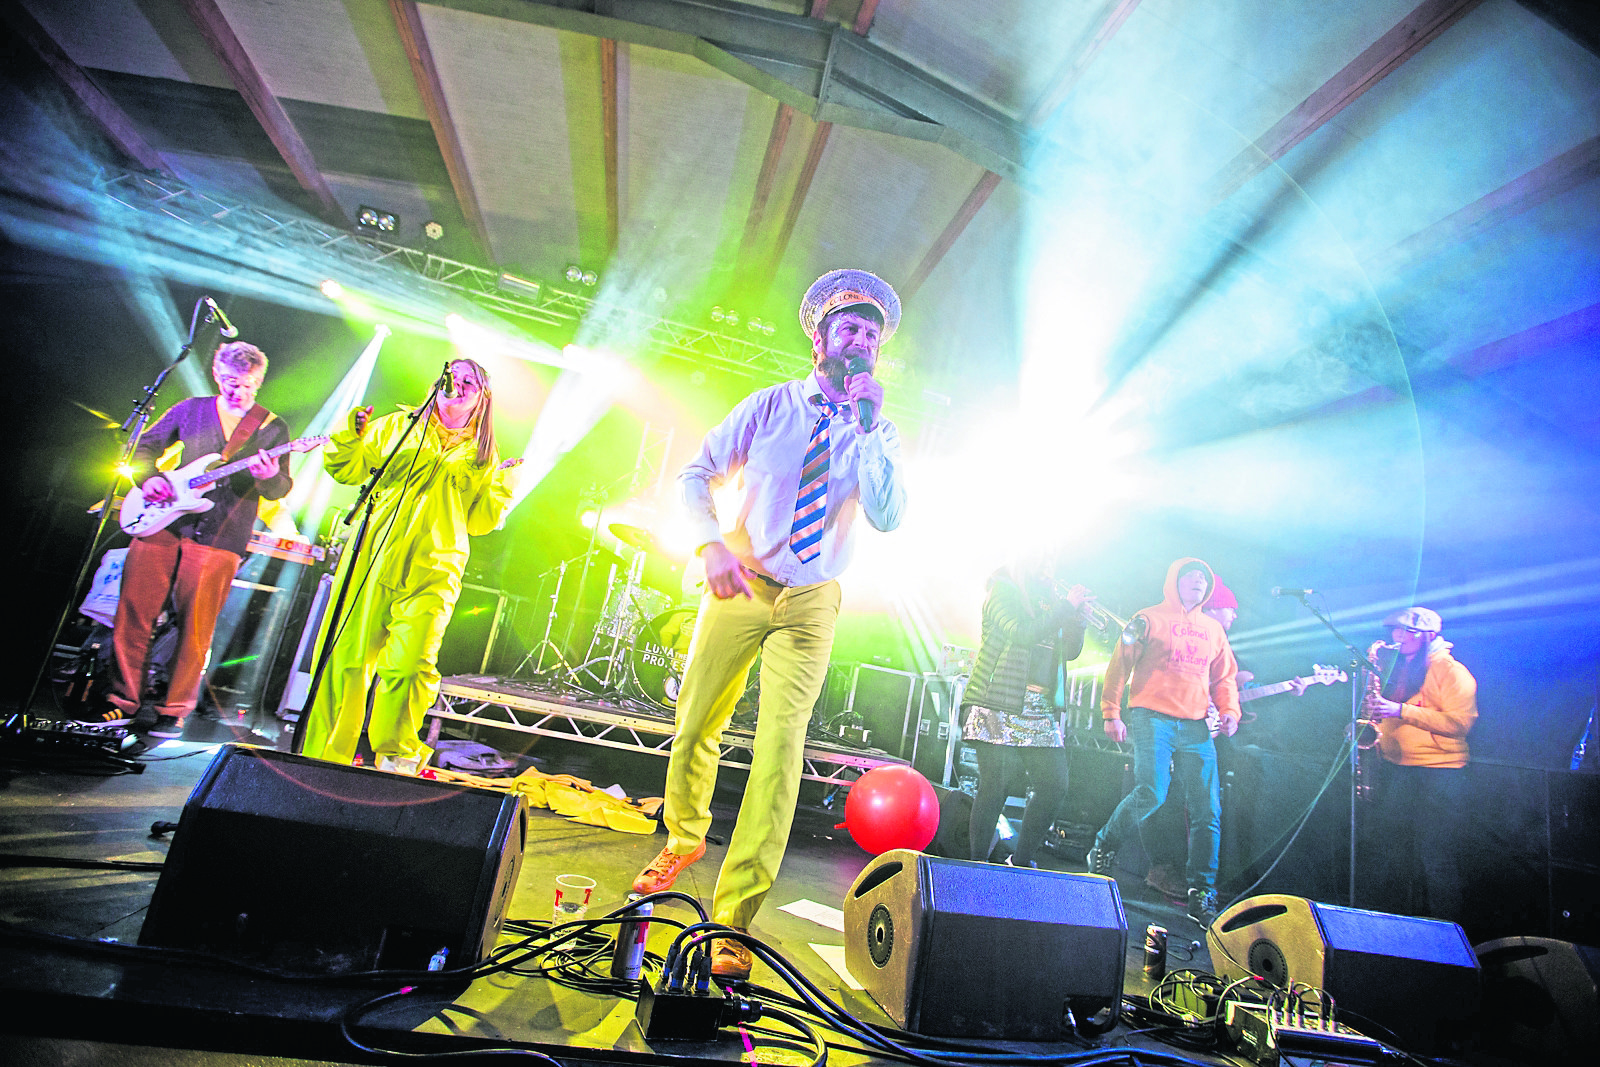 Colonel Mustard and the Dijon 5 set the party mood at Groove Cairngorm Festival.